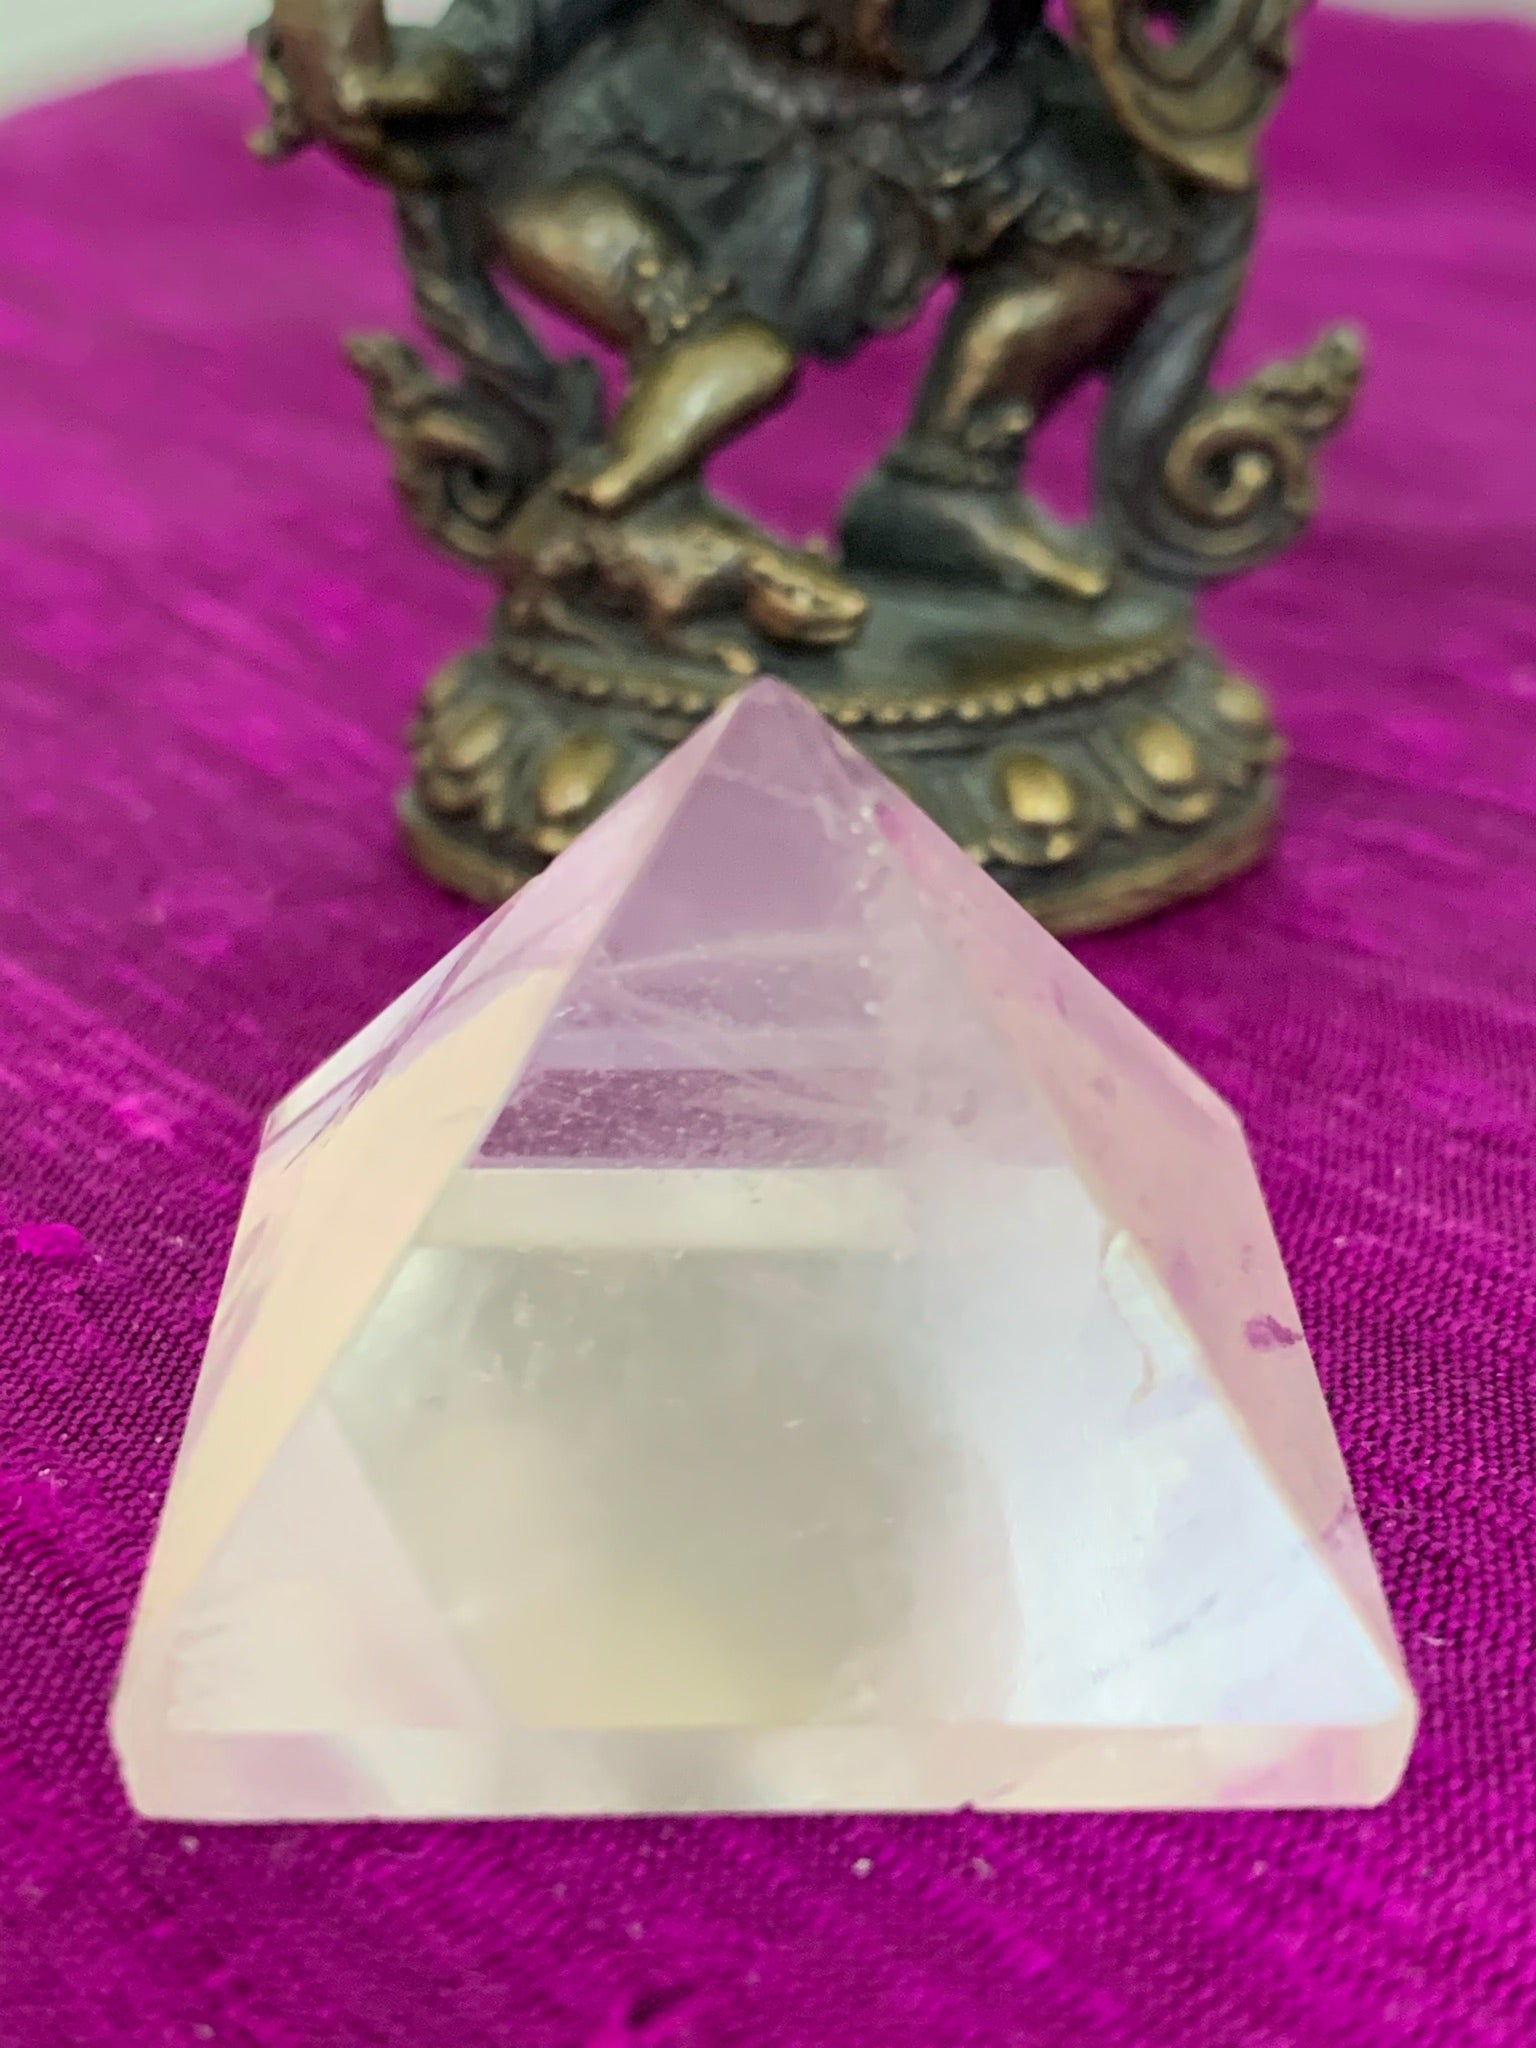 Close-up view. Powerful clear quartz pyramid is perfect for your altar, meditation space or anywhere in your home or office. This pyramid is cloudy or milky in appearance - more translucent than the other clear quartz pyramids. So, the clear vs the cloudy - it's all in the eye of the beholder ;). Quartz is the "most powerful healing and energy amplifier on the planet" (Judy Hall). Pyramids are used to amplify and transform energy. Approximately 1"x1".